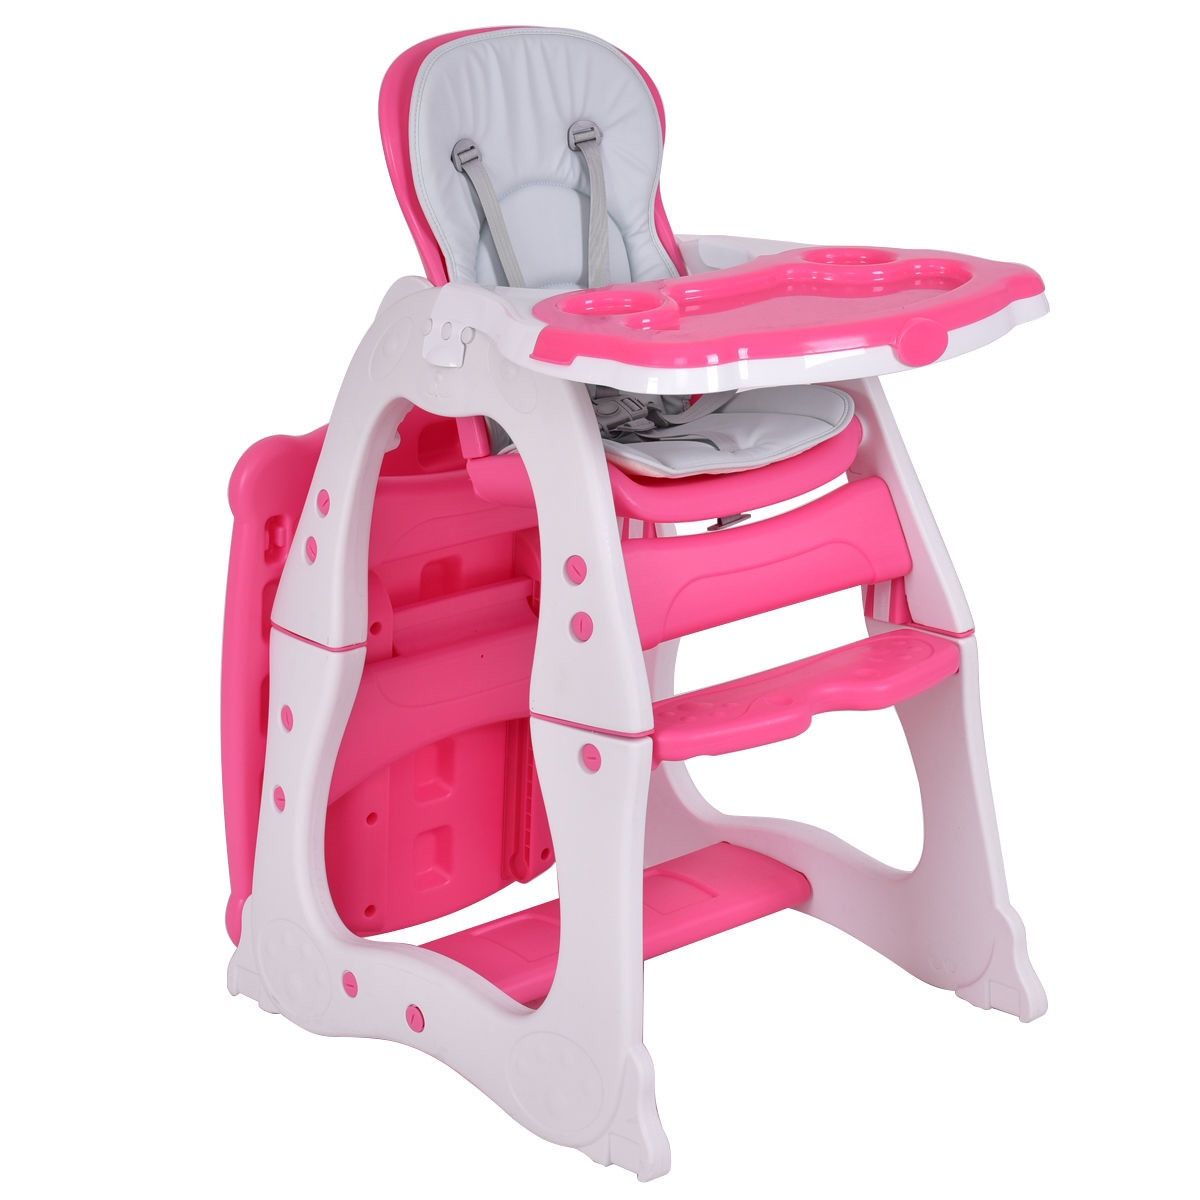 3 in 1 Baby High Chair Convertible Play Table Seat Booster Toddler Feeding Tray Pink. ( almost new)